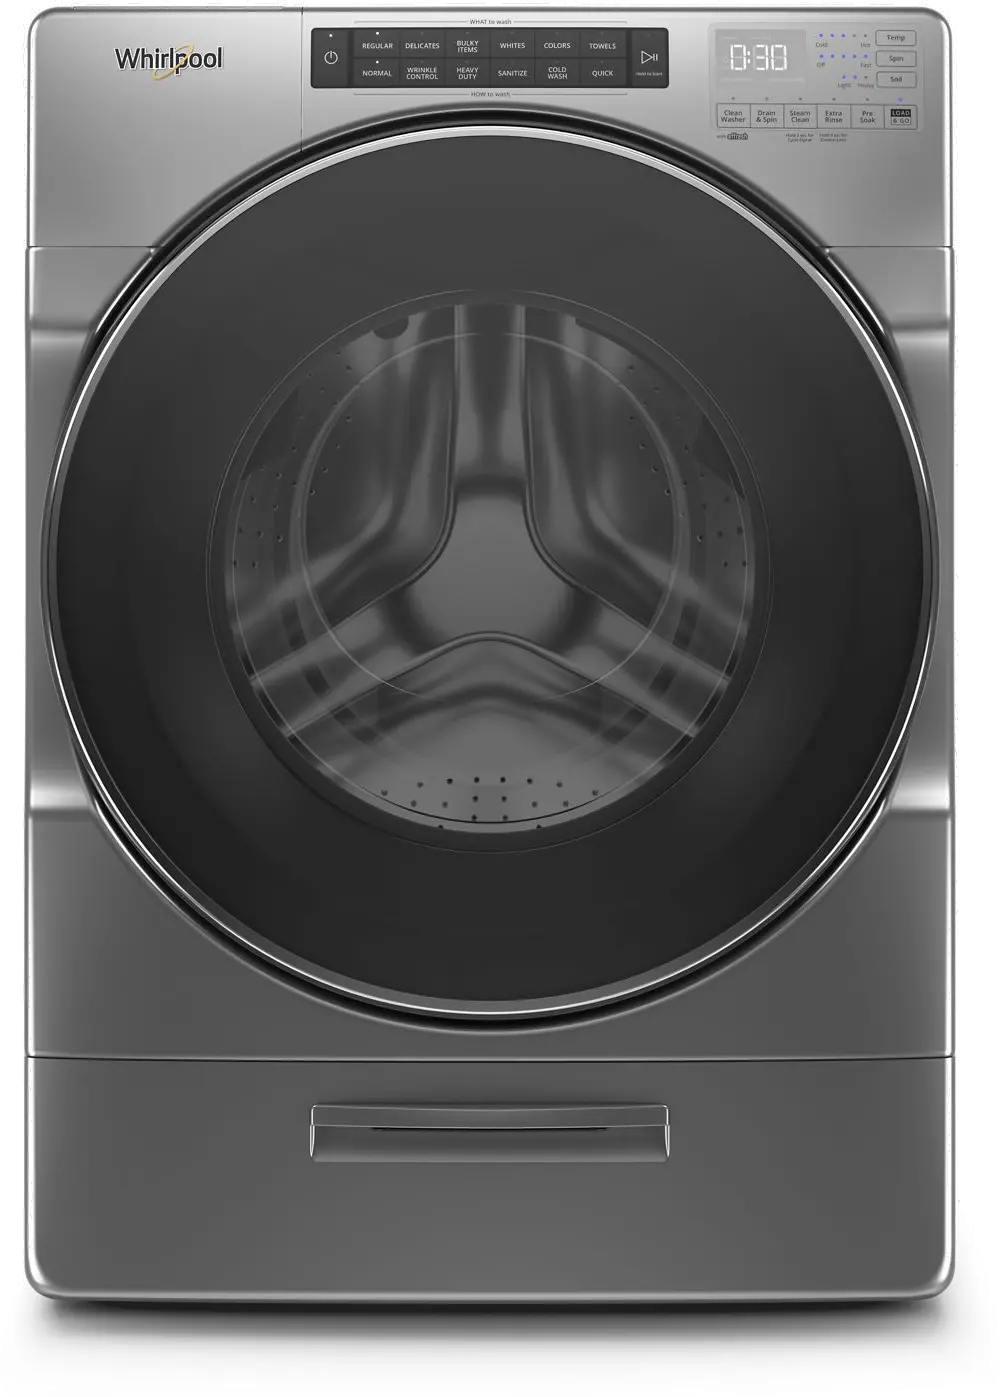 WFW6620HC Whirlpool Front Load Washer Closet-Depth - 4.5 cu. ft.  Chrome Shadow-1